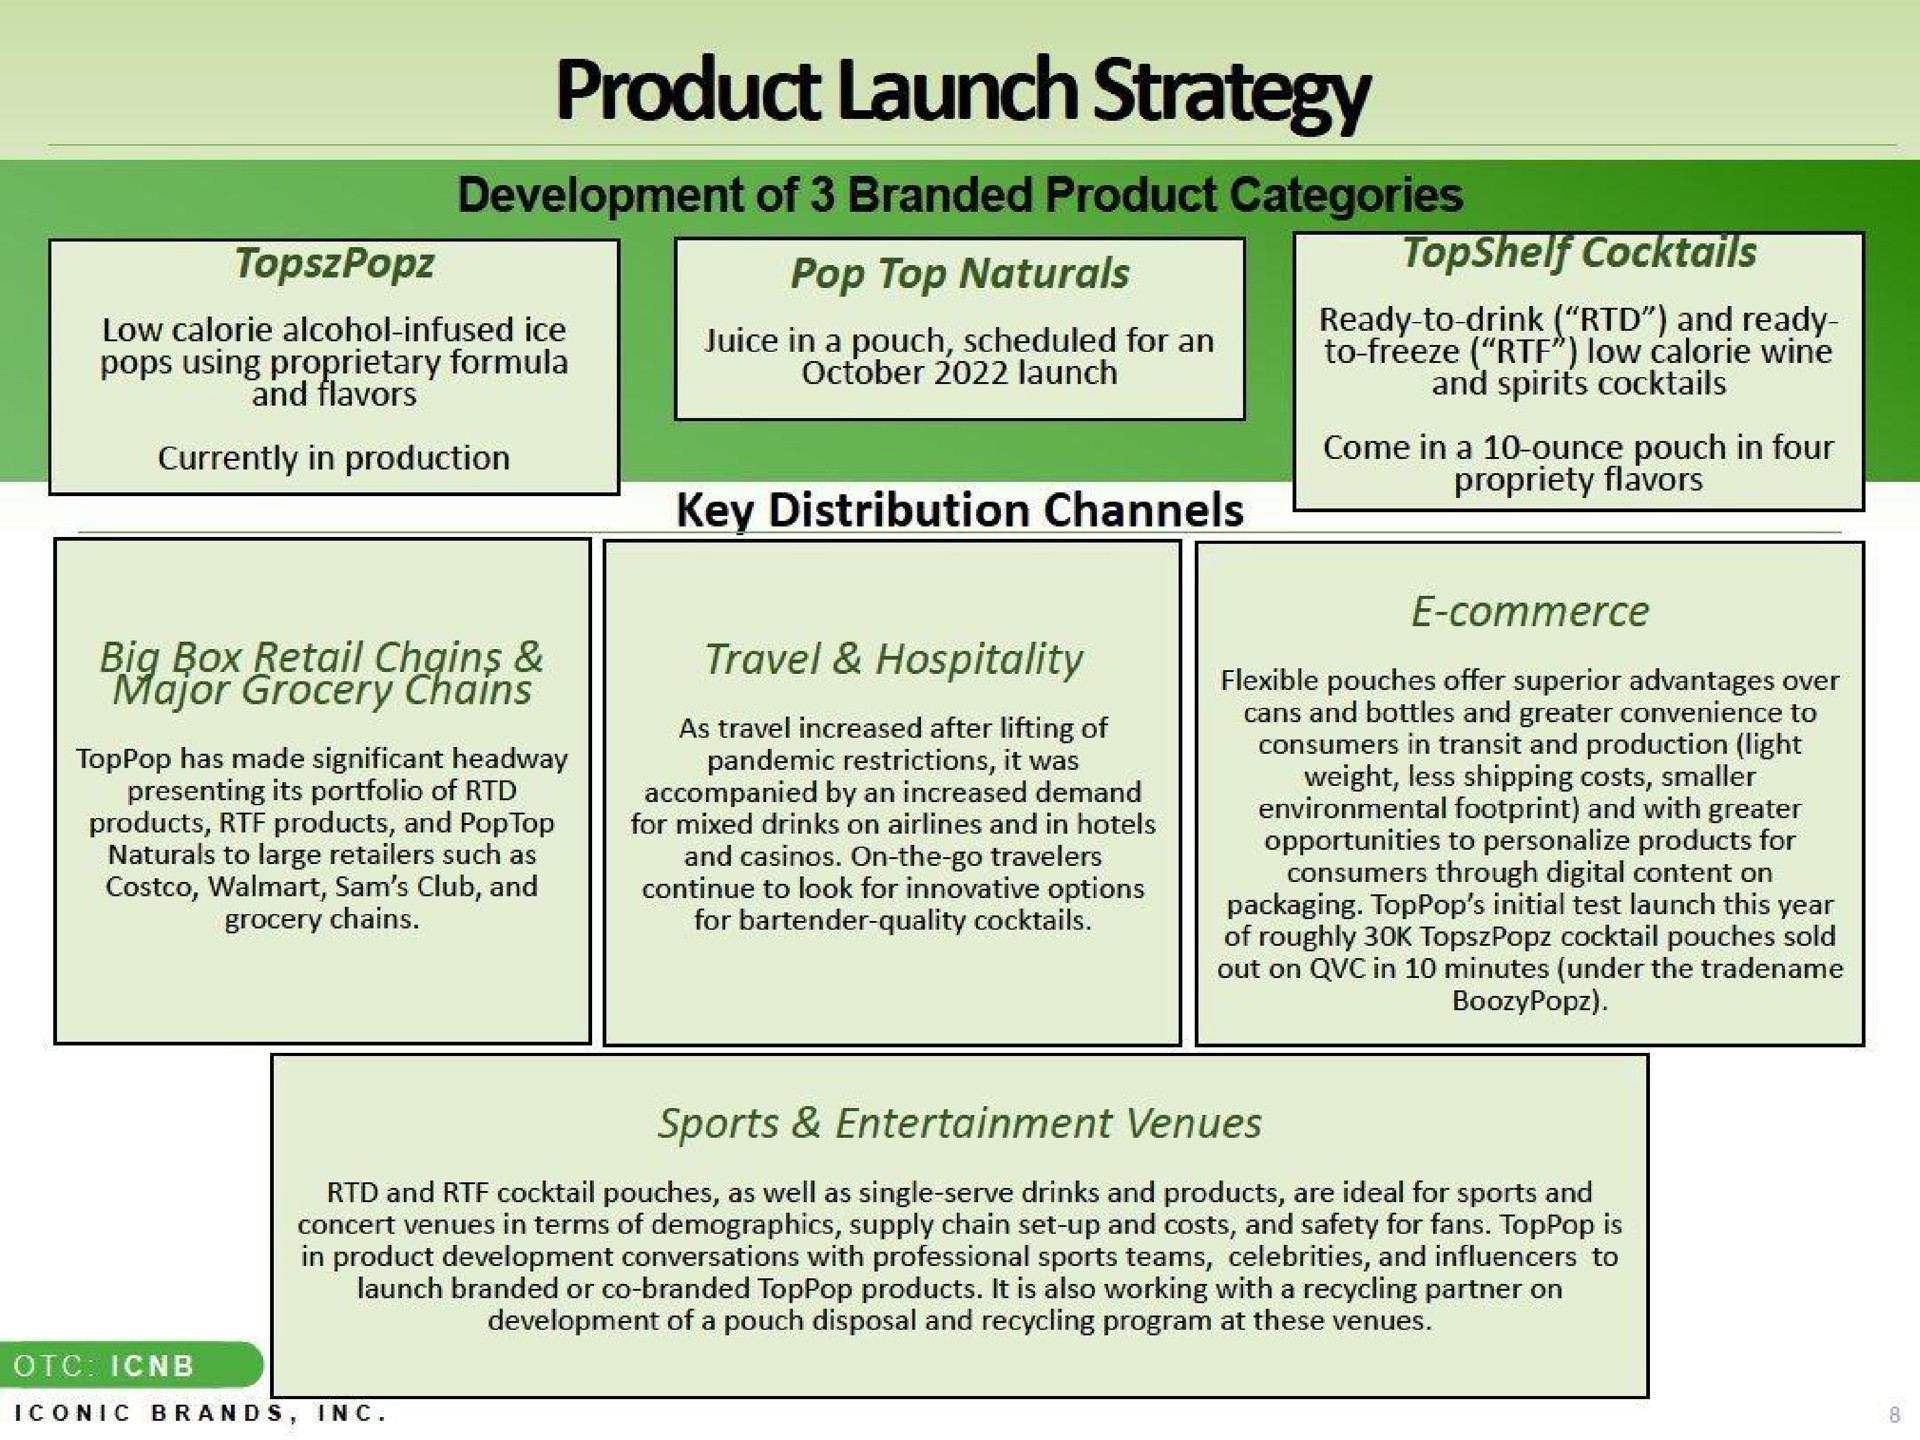 product launch strategy key distribution channels | Iconic Brands